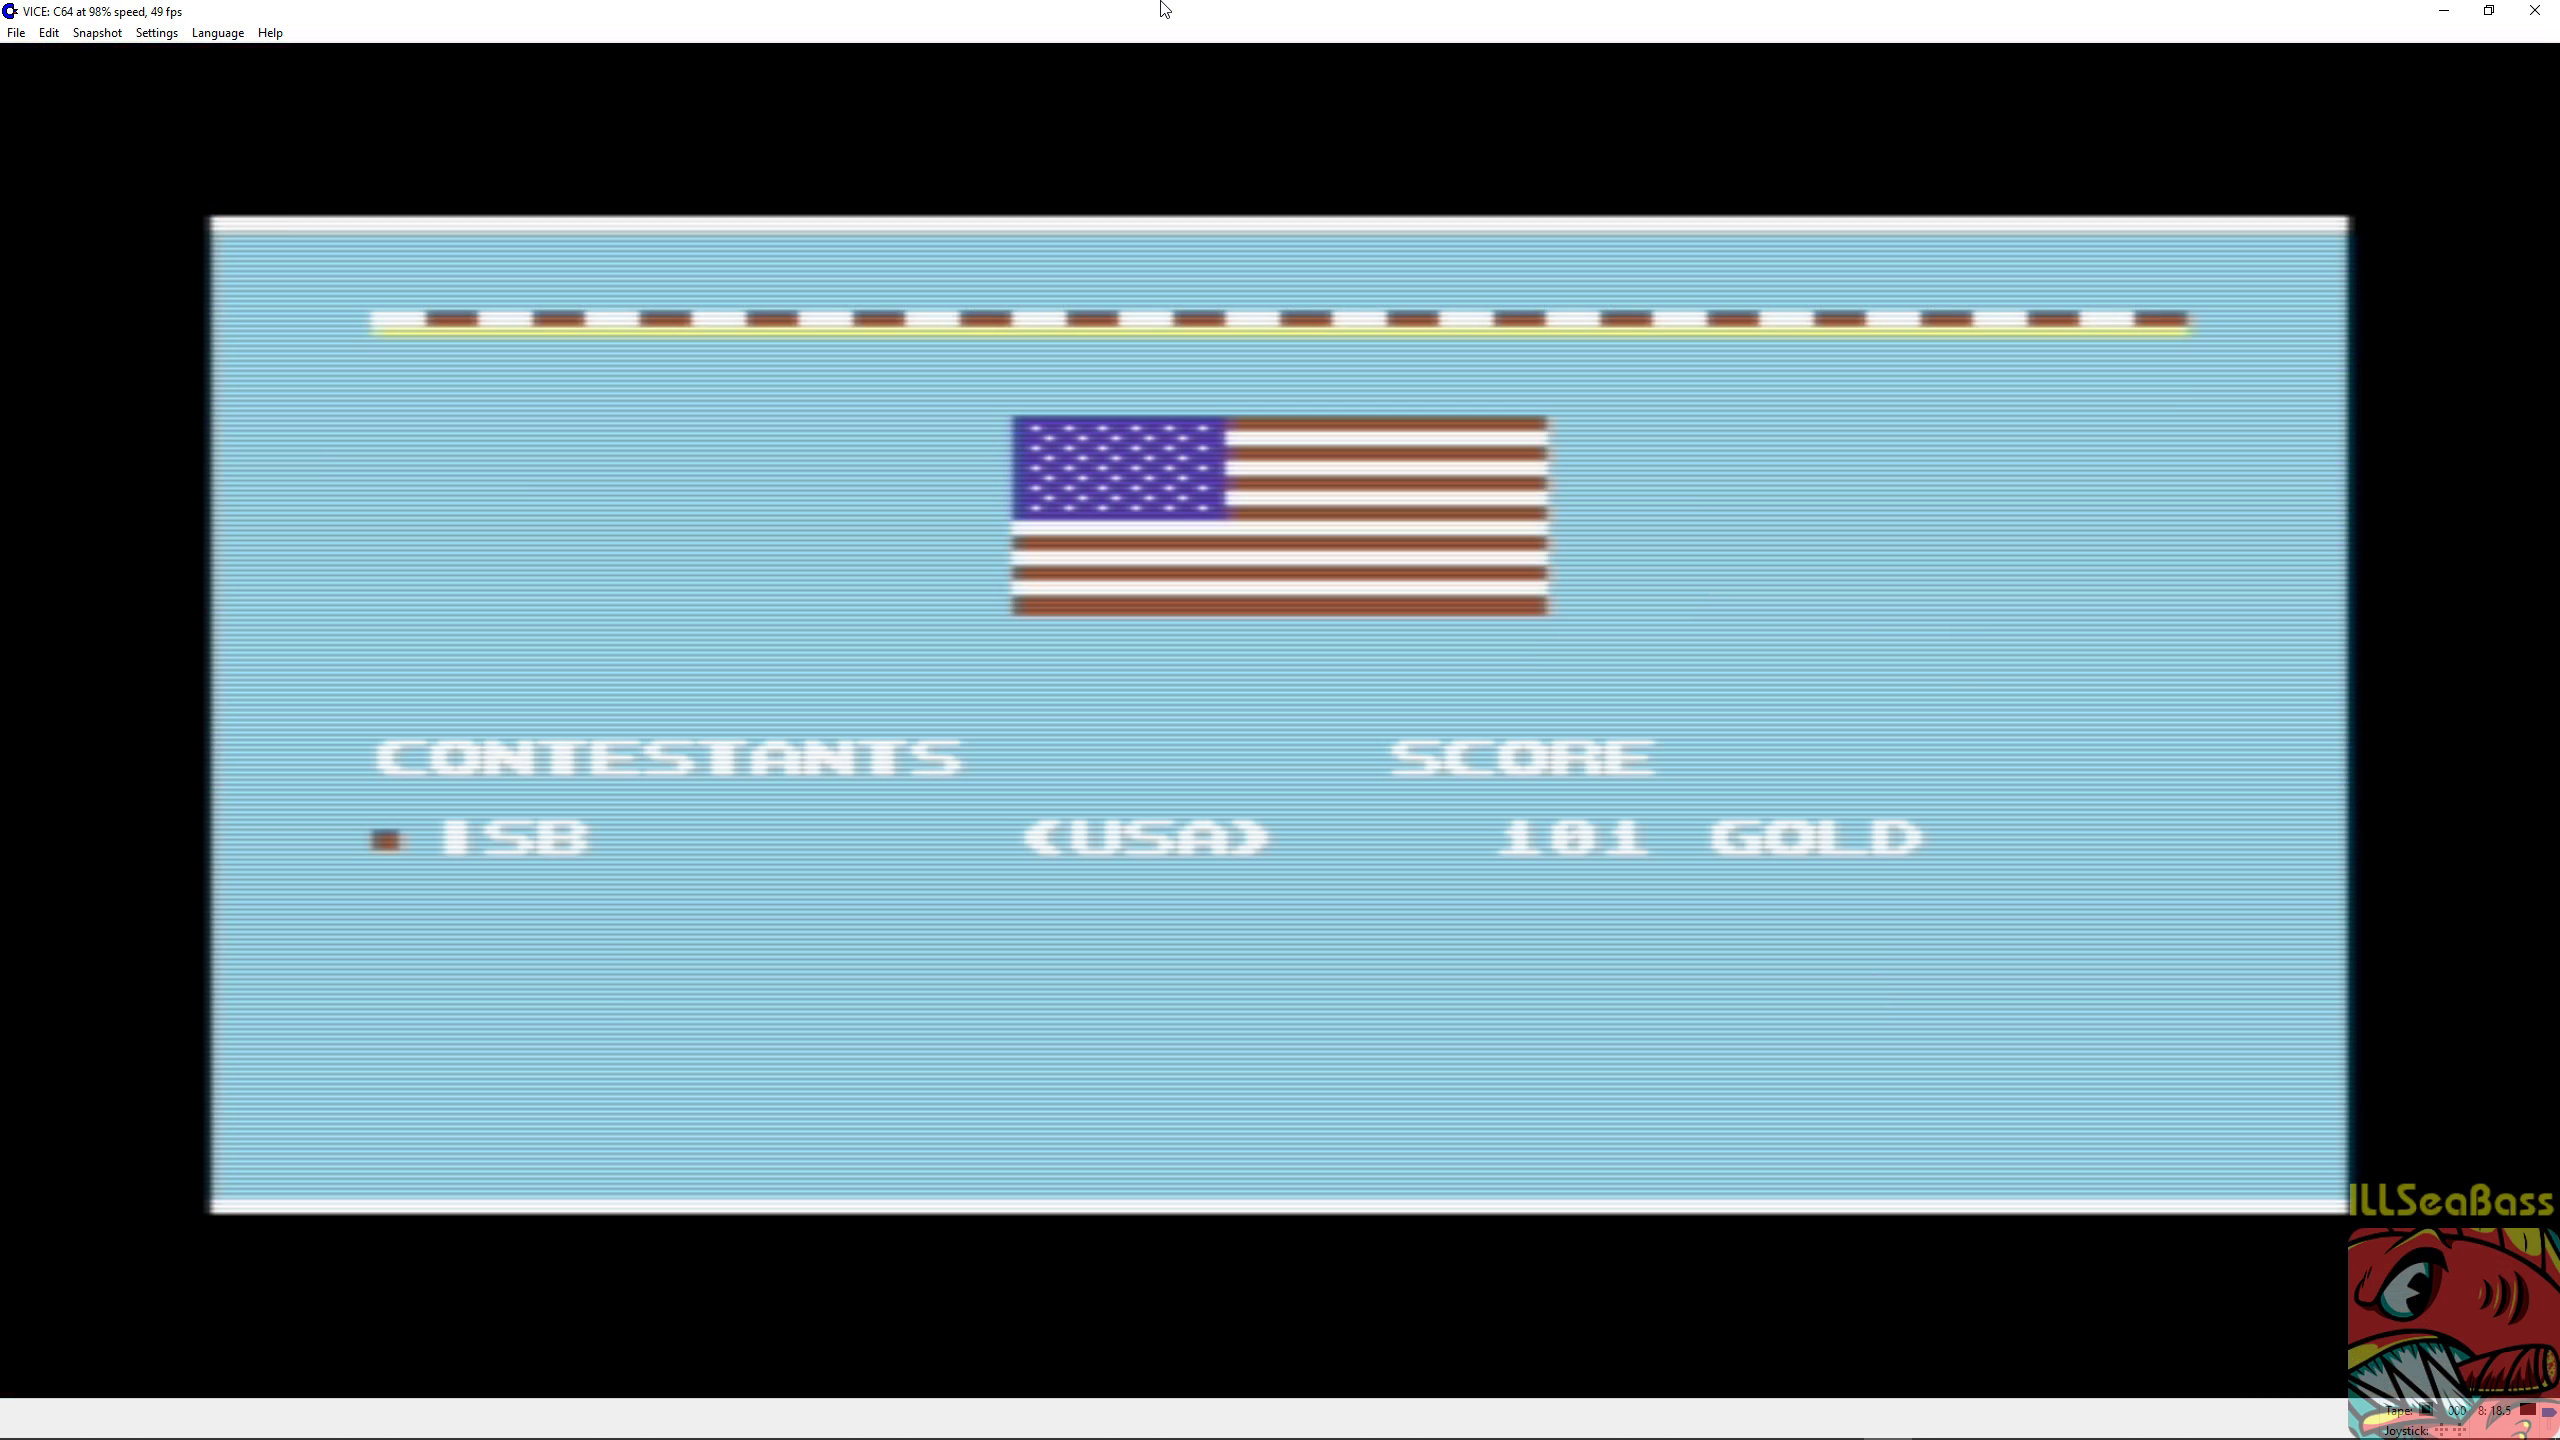 ILLSeaBass: World Games [Cliff Diving] (Commodore 64 Emulated) 101 points on 2018-08-27 14:25:04